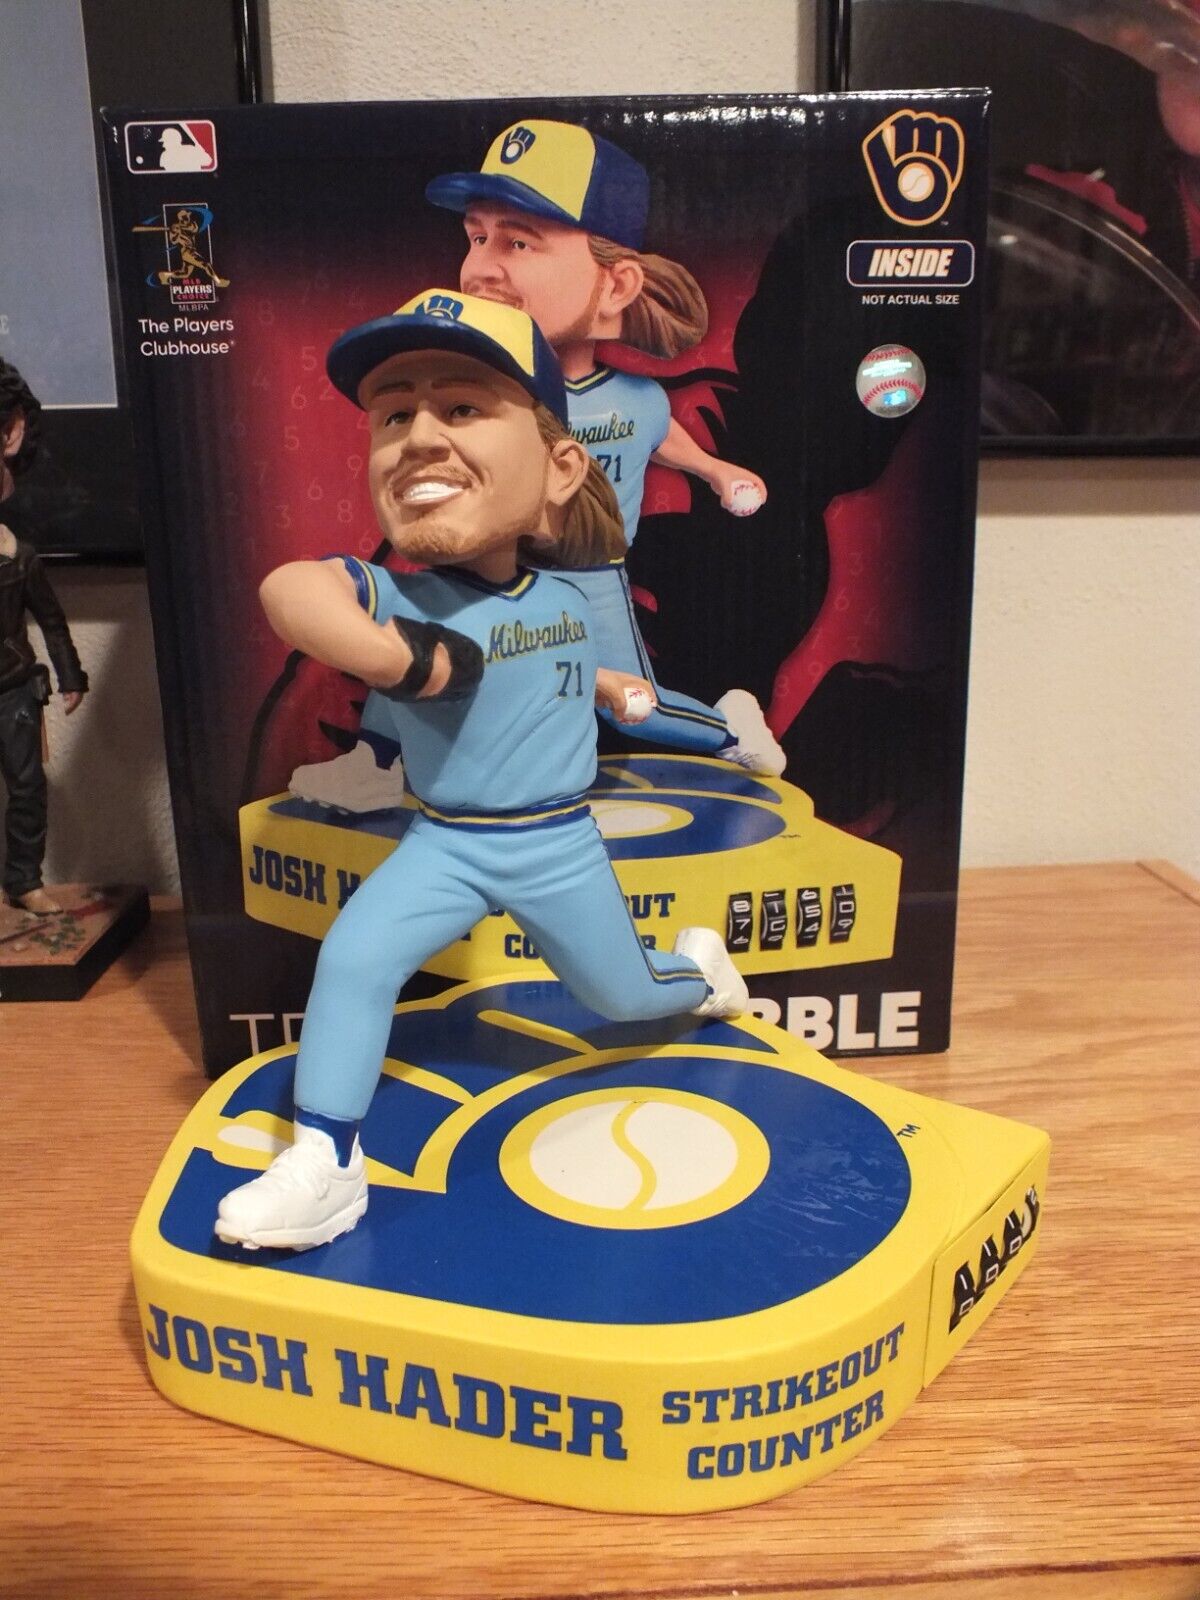 FoCo Josh Hader Astros Padres Brewers Strikeout Counter Bobblehead